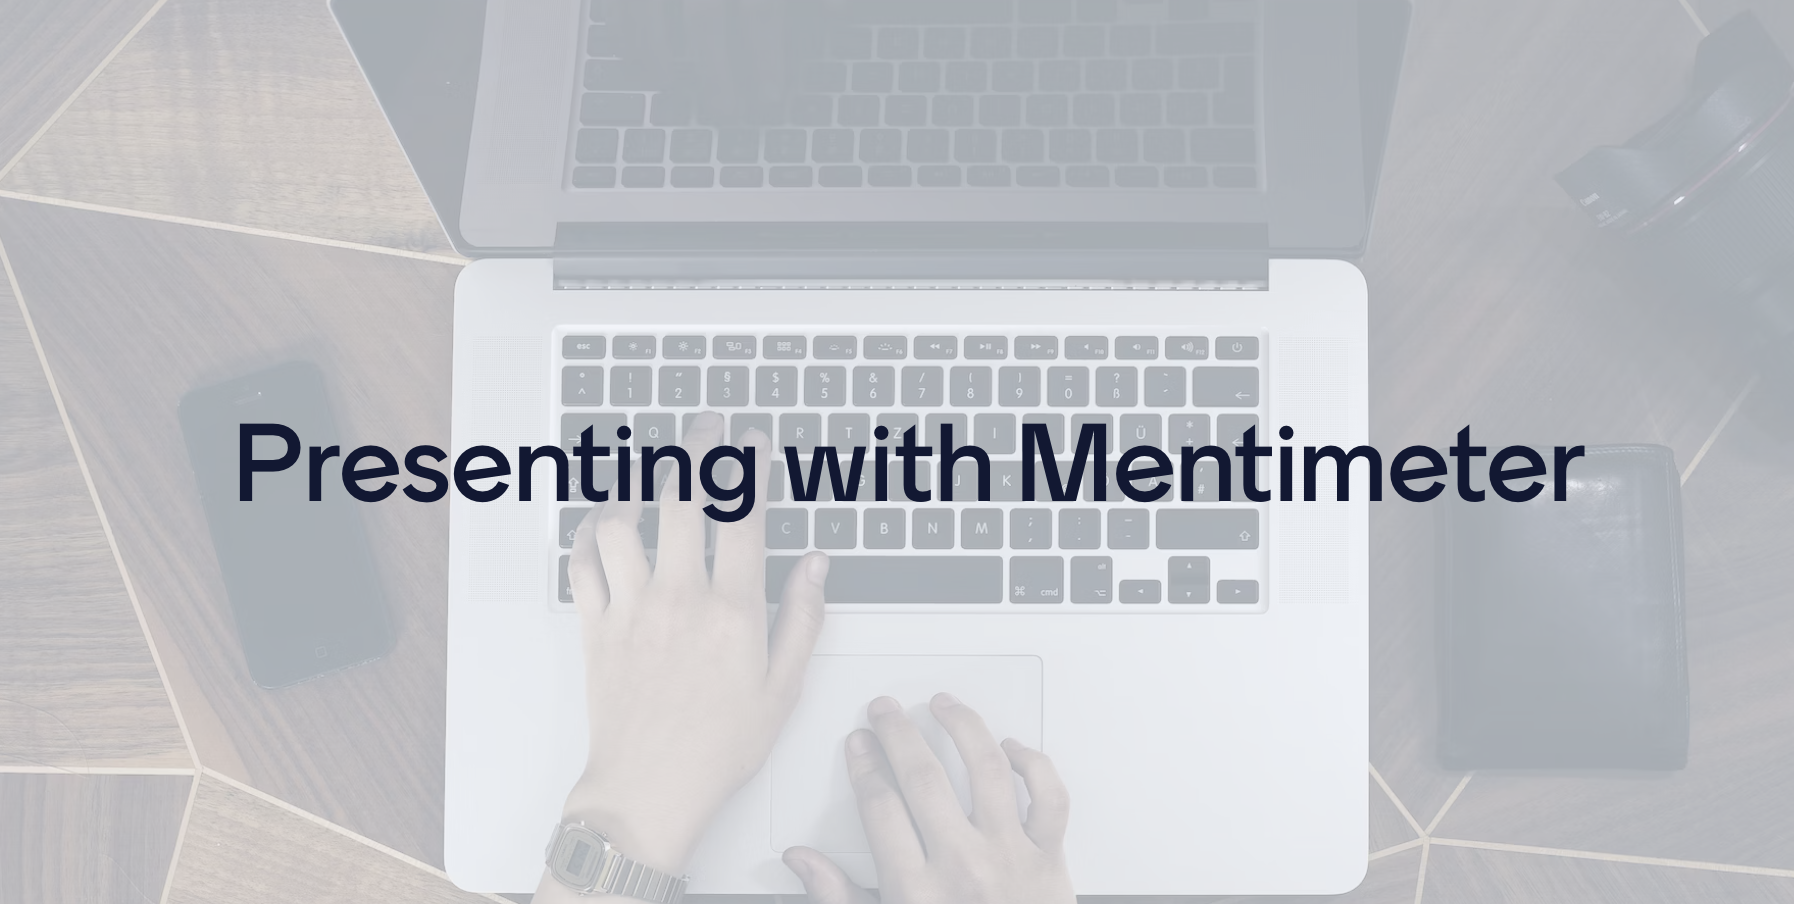 The heading reads 'Presenting with Mentimeter'. It is on top of a faded background image of someone typing on a laptop.